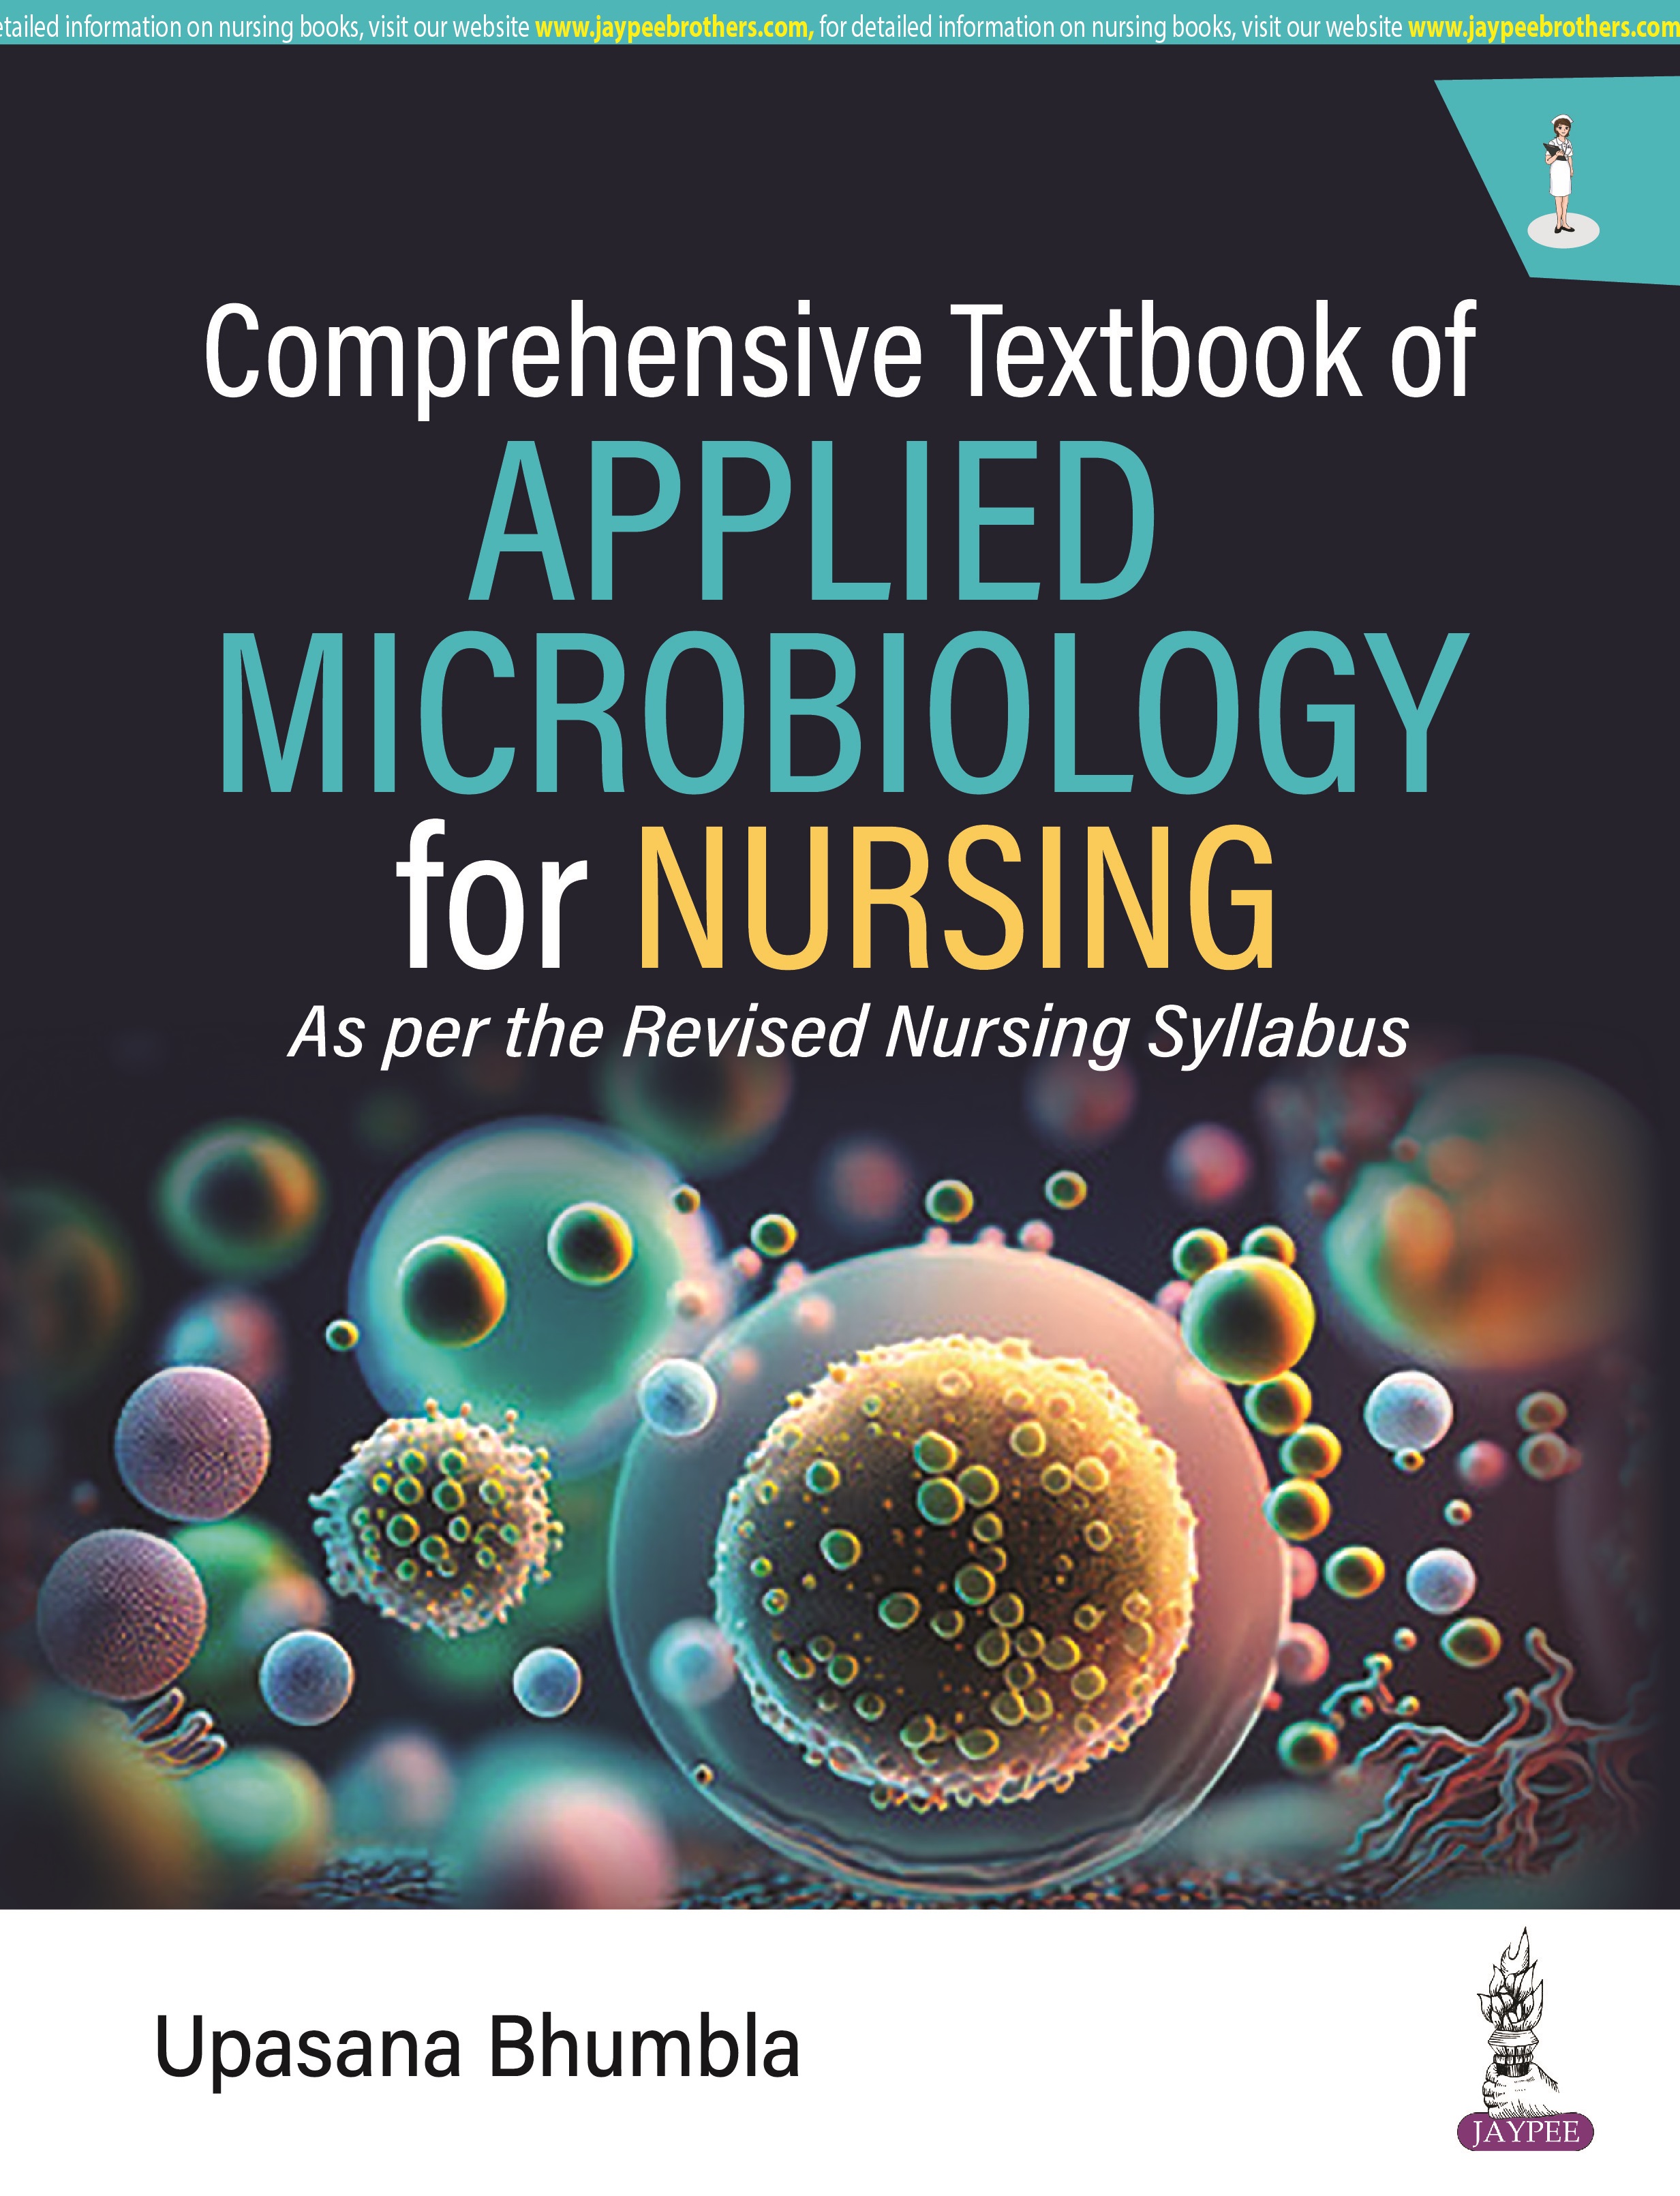 Comprehensive Textbook of Applied Microbiology for Nursing